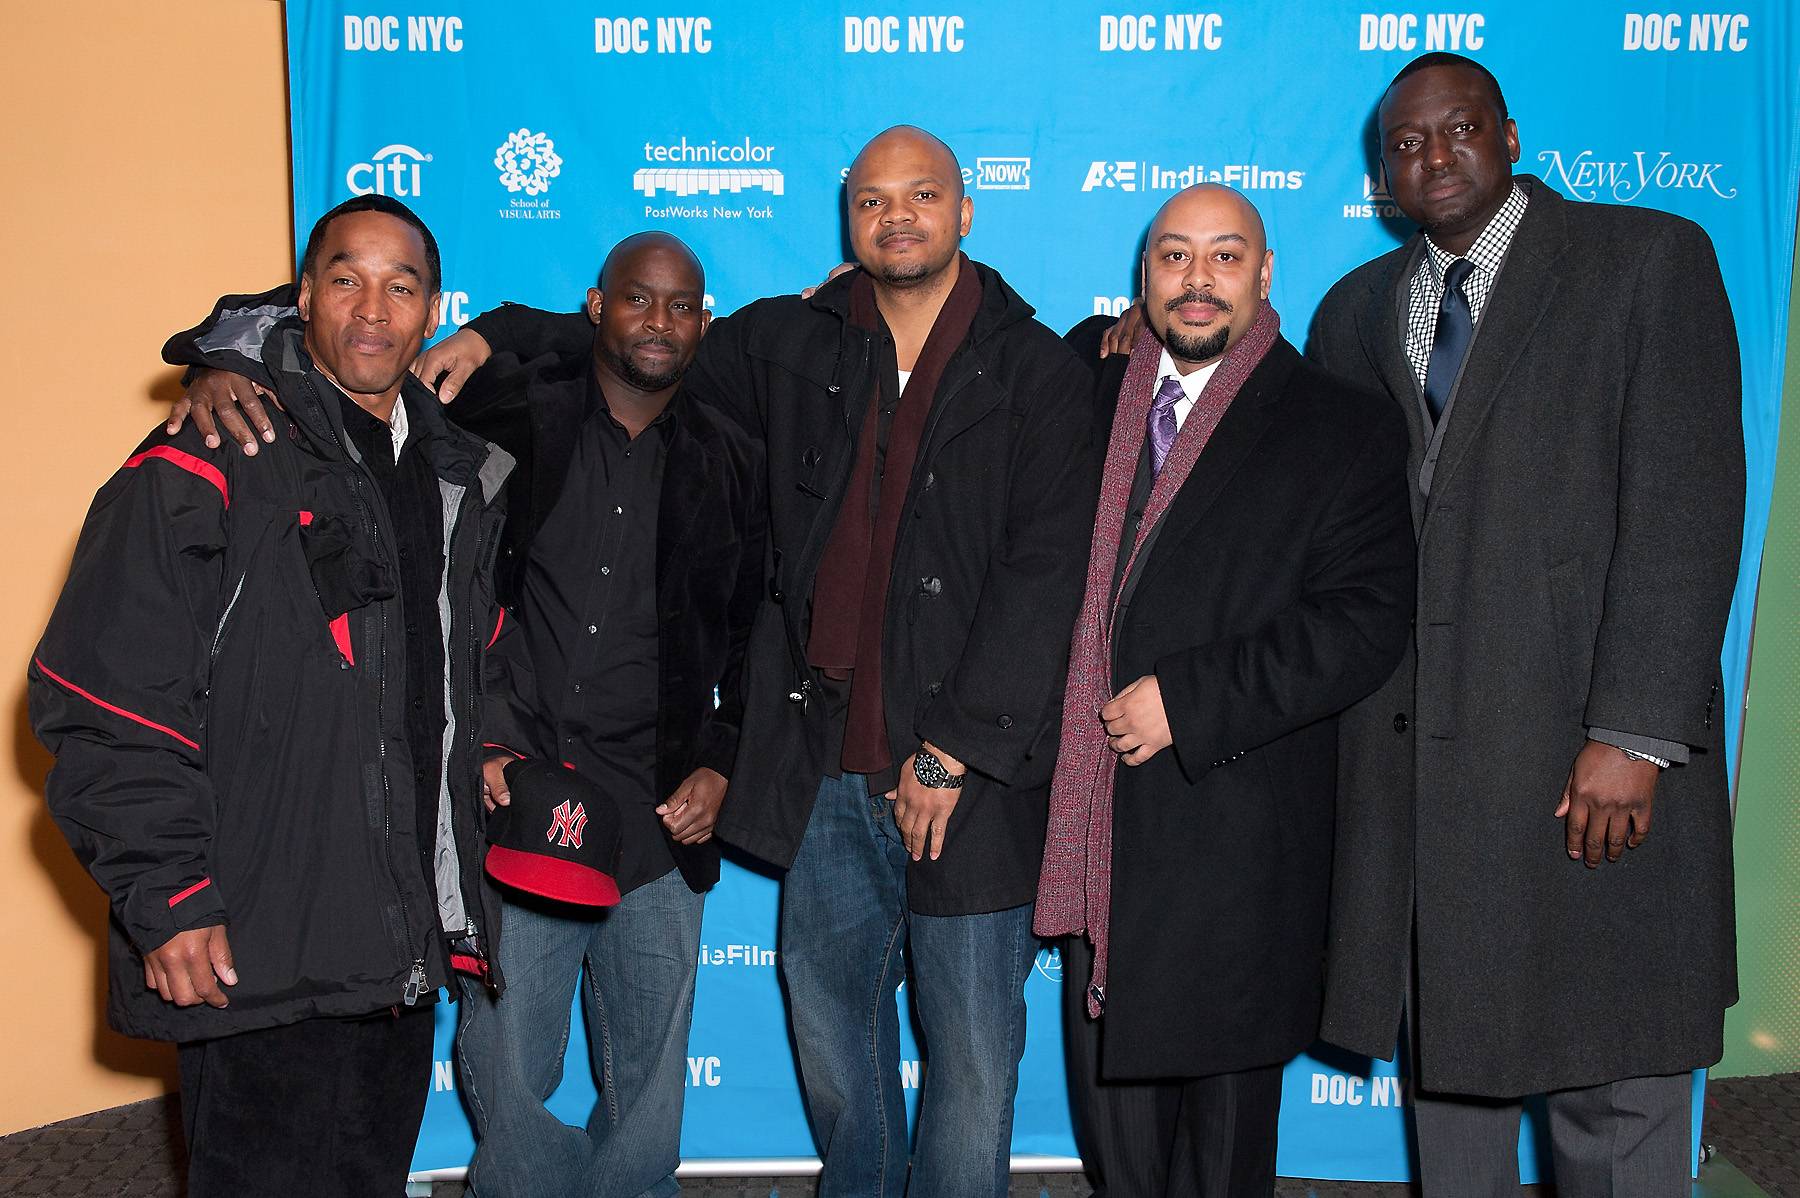 Central Park Five Sues New York for Additional $52 Million - The Central Park Five might have a few projects lined up to share their story and have a plan to give back to the community. The men are suing the state for an additional $52 million, the NY&nbsp;Daily News reported. Two of the men, Raymond Santana and Yusef Salaam, are hoping to open an advocacy center aimed at educating youth in Harlem on their rights, while also offering resources to recently released convicts. The money, should they win, would service projects like these.&nbsp;&nbsp;(Photo: D Dipasupil/Getty Images)